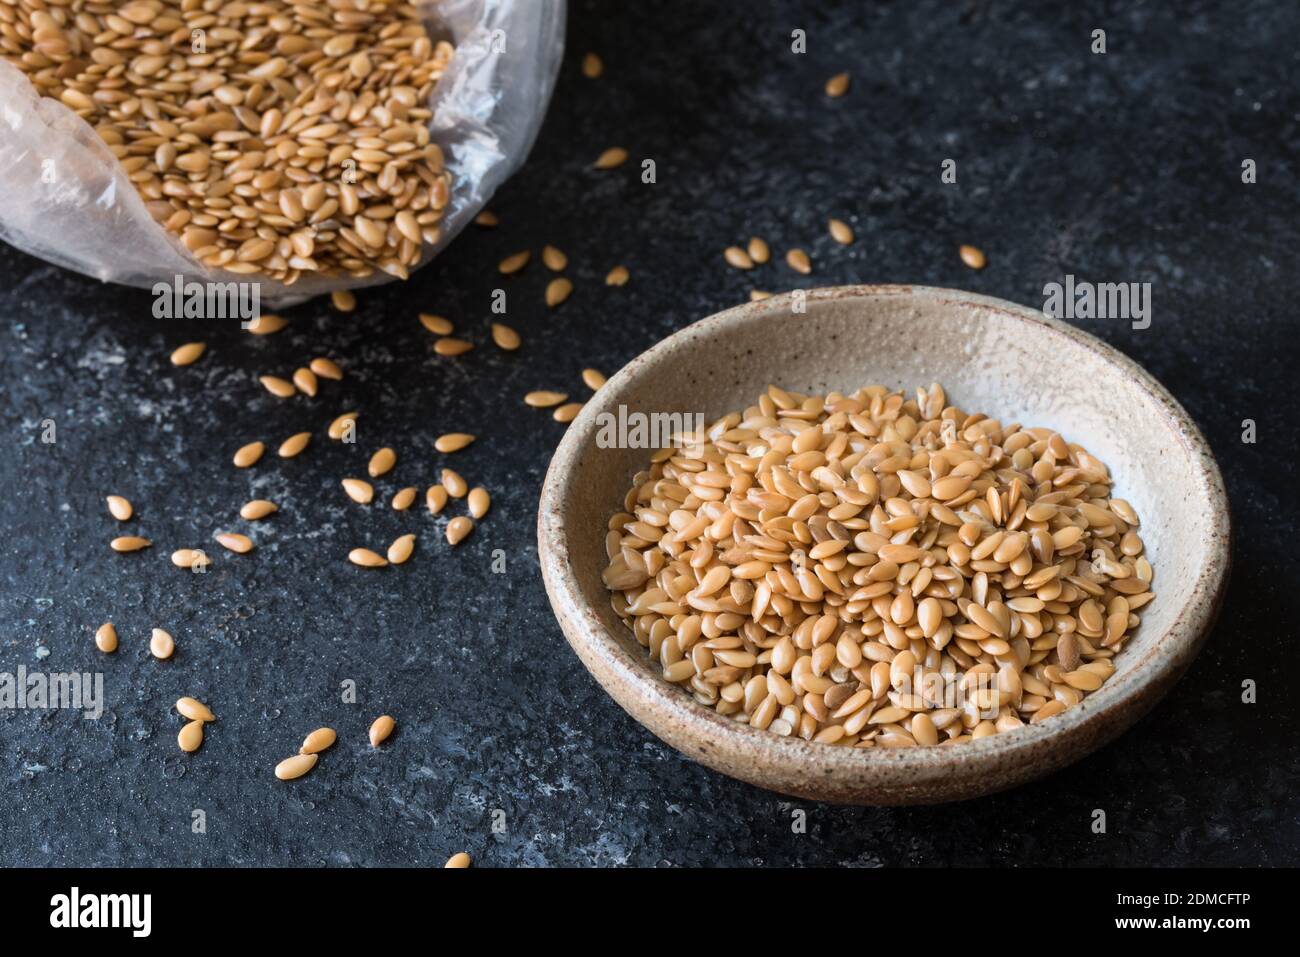 High Angle View Of Flax Seeds In Bowl On Table Stock Photo